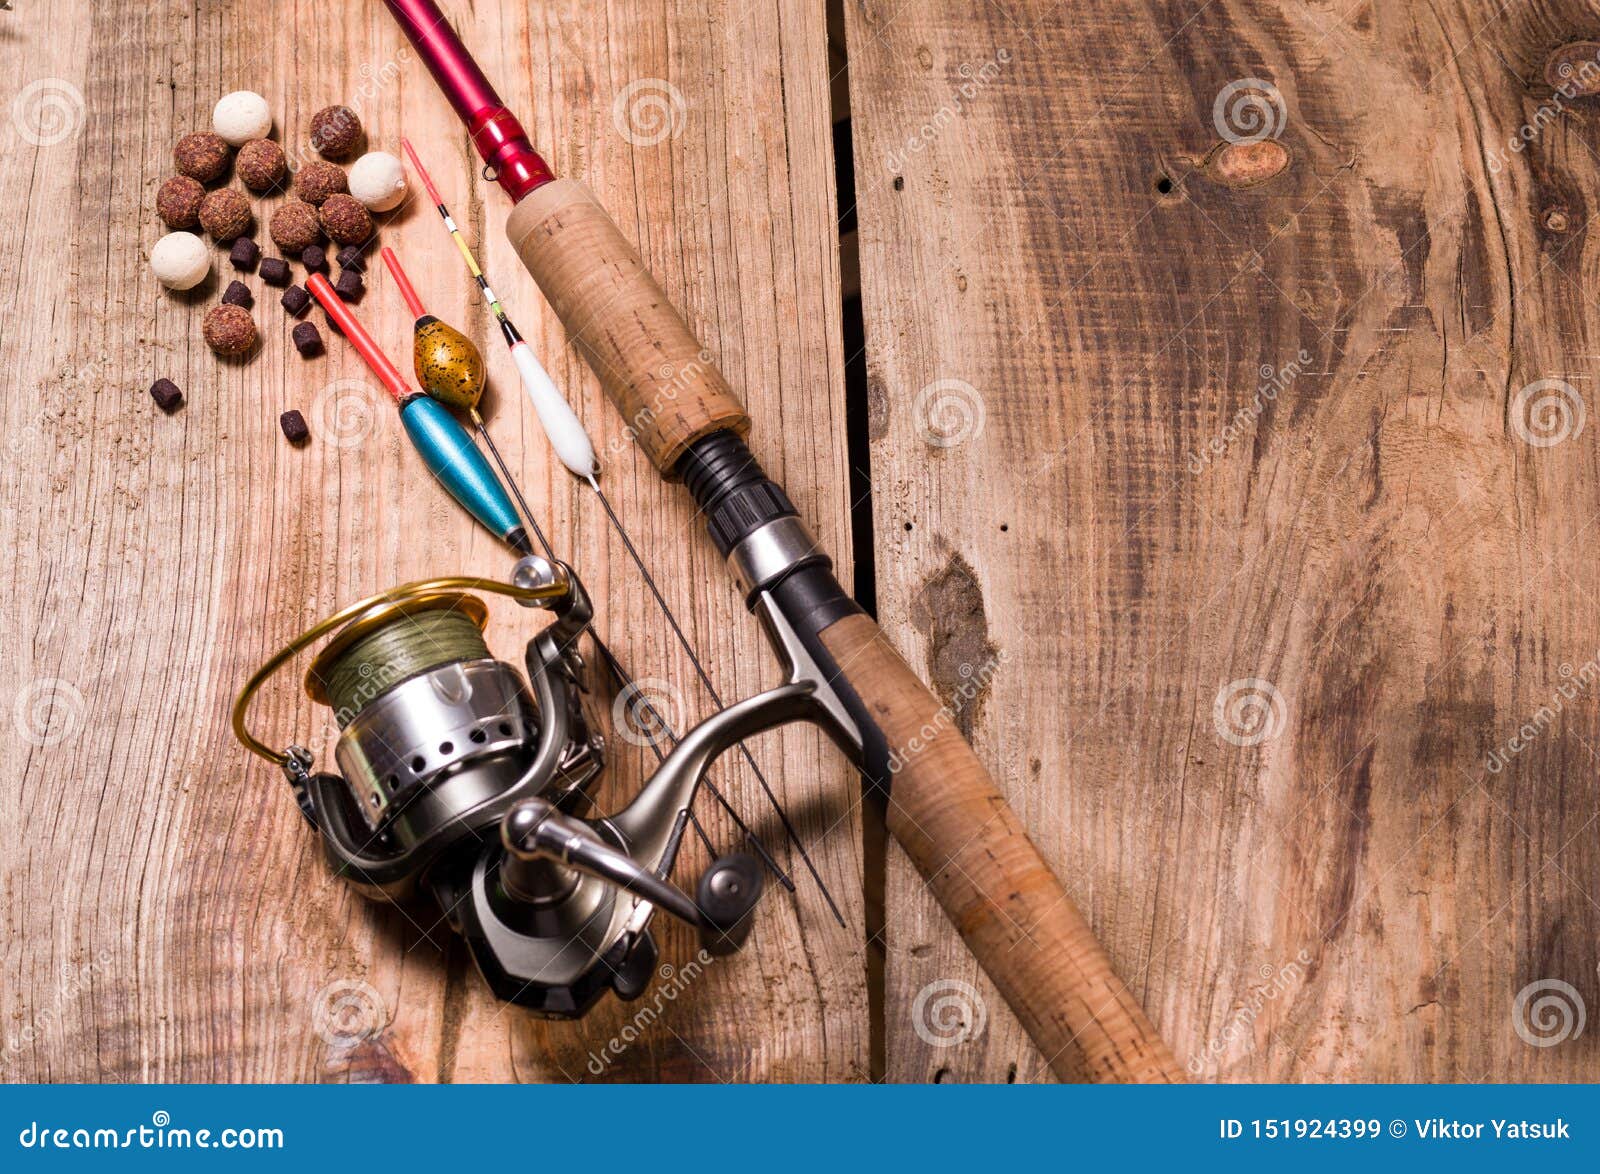 Fishing Rod with Reel and Fishing Line. Fishing Floats and Baits